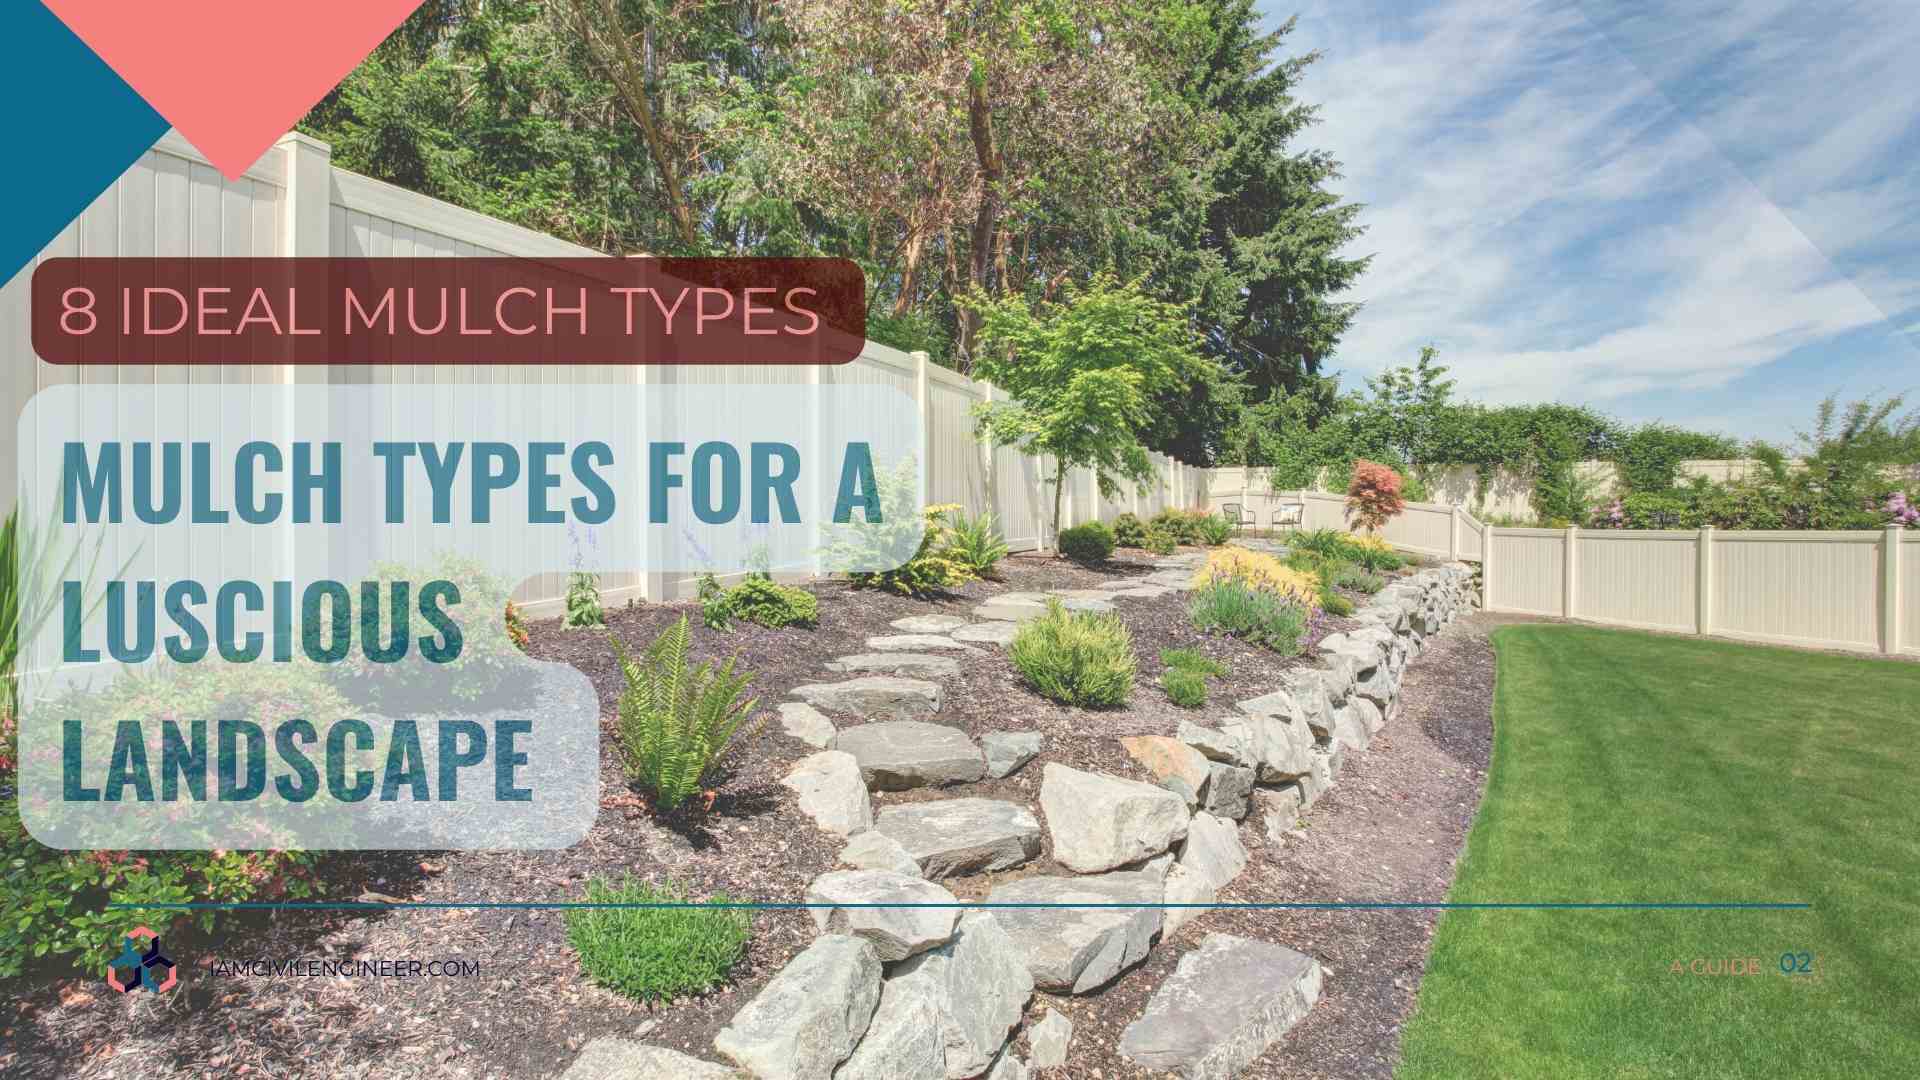 8 Ideal Mulch Types for a Luscious Landscape